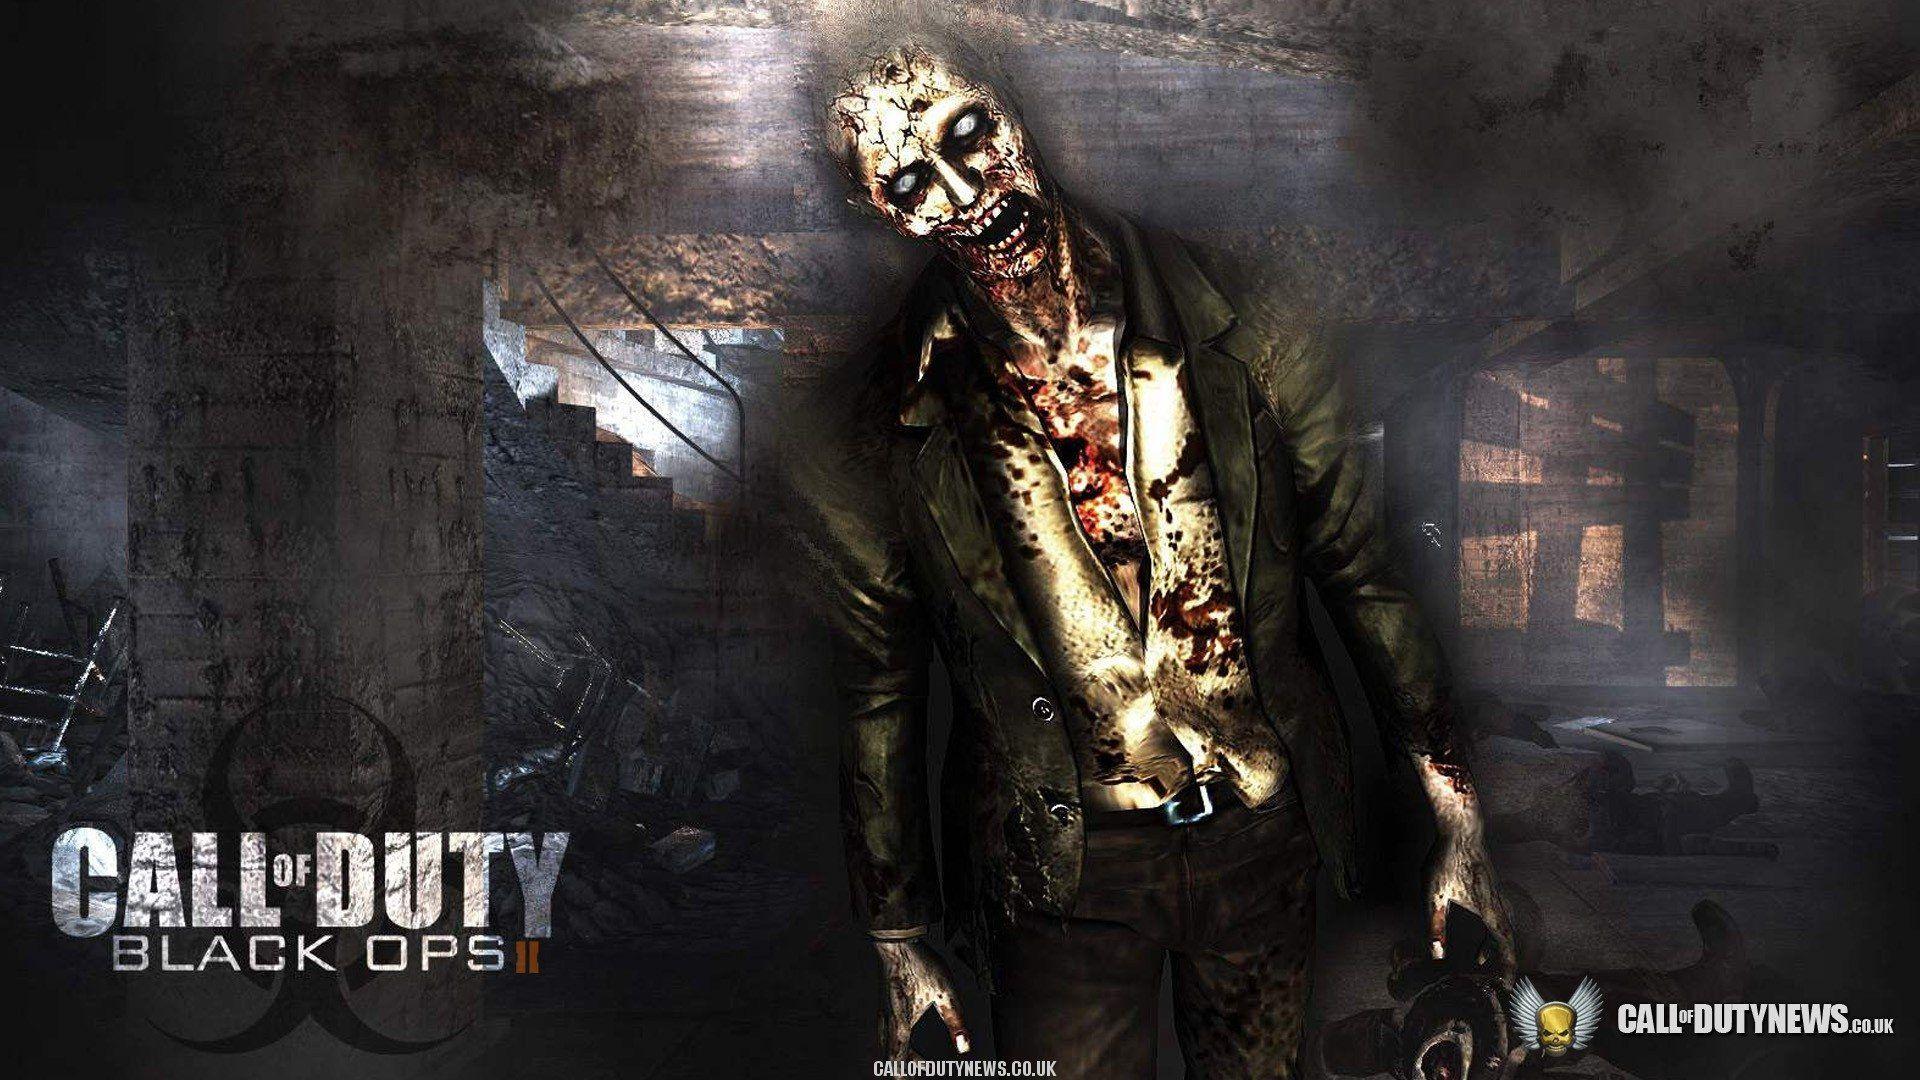 Wallpaper Of Call Of Duty Black Ops 2